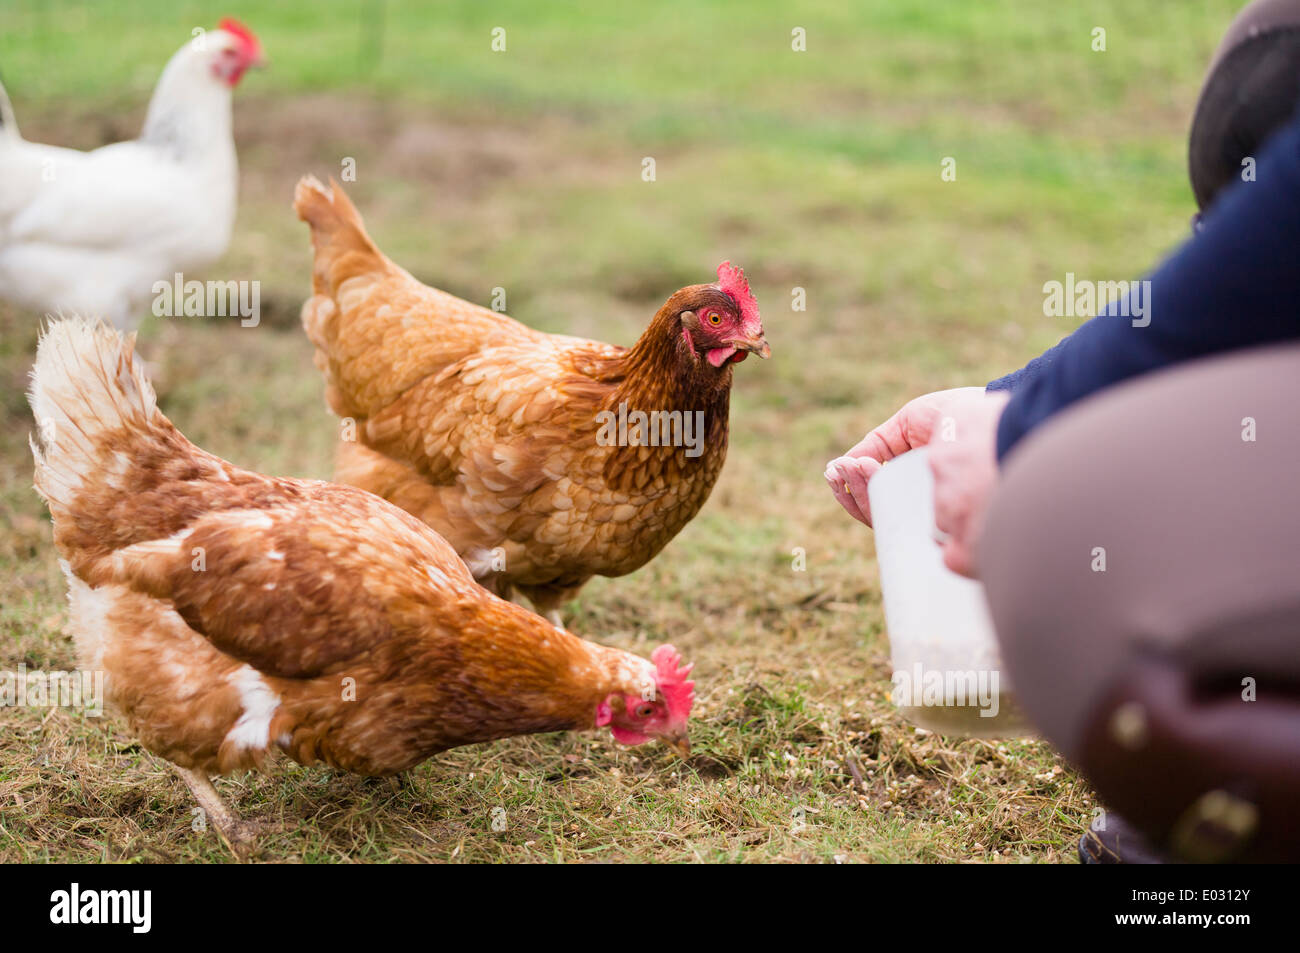 Domestic hens pecking at grain on the ground. Stock Photo